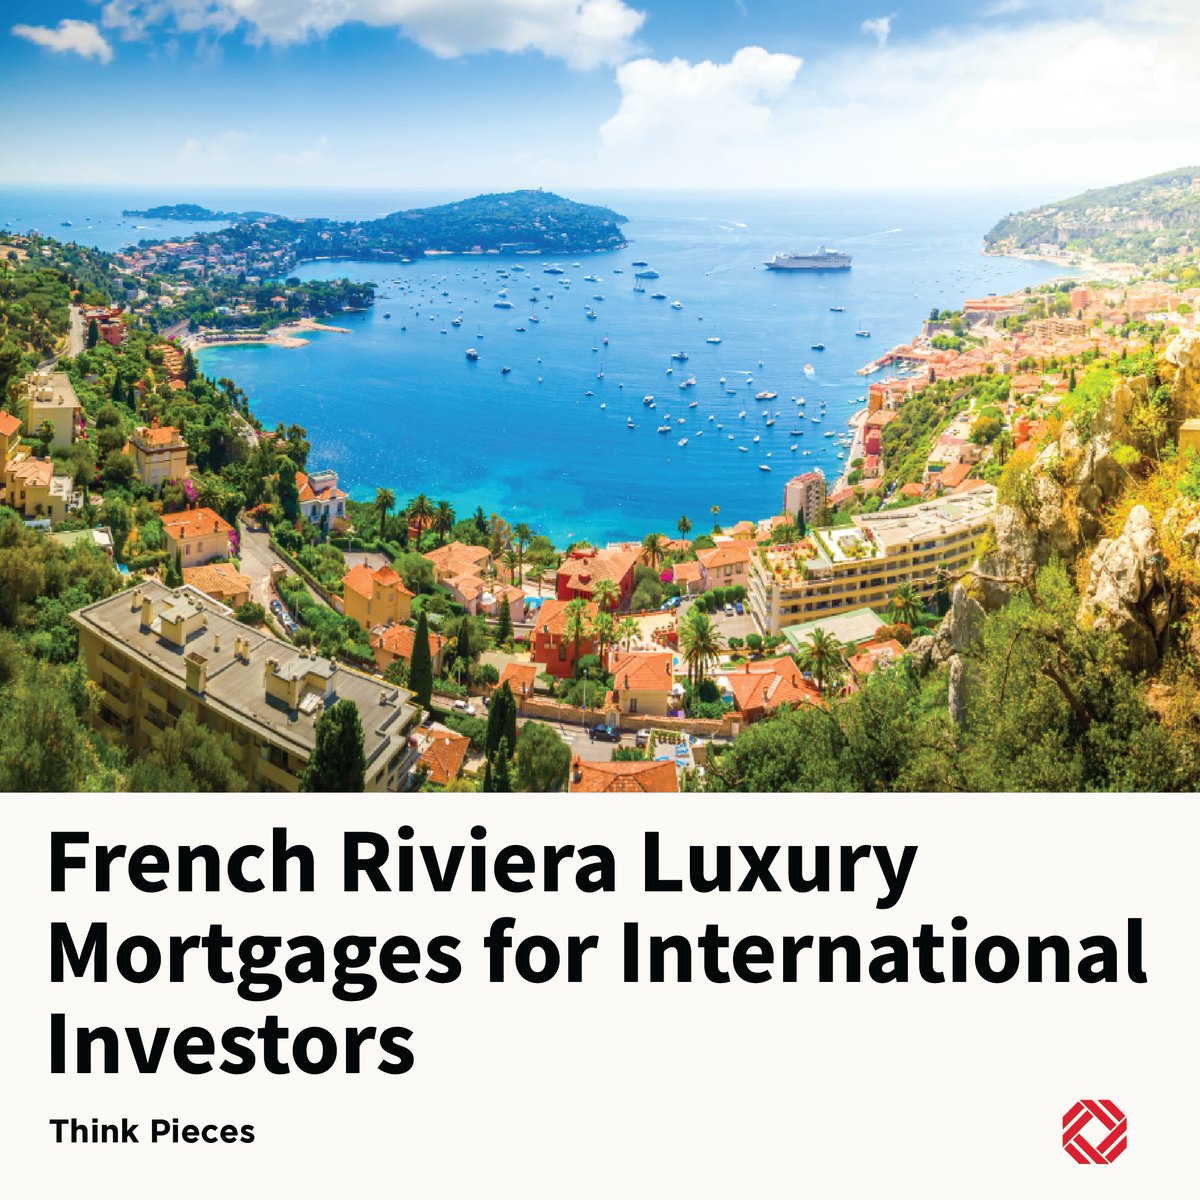 Exploring property investments in France? Our experts offer French bank & private lending solutions for our global clients.

Schedule a call with our International Mortgage Specialist today!

hello@gmg.asia

#frenchriveria #france #cotedazur #mortgage #realestate #property #FRA